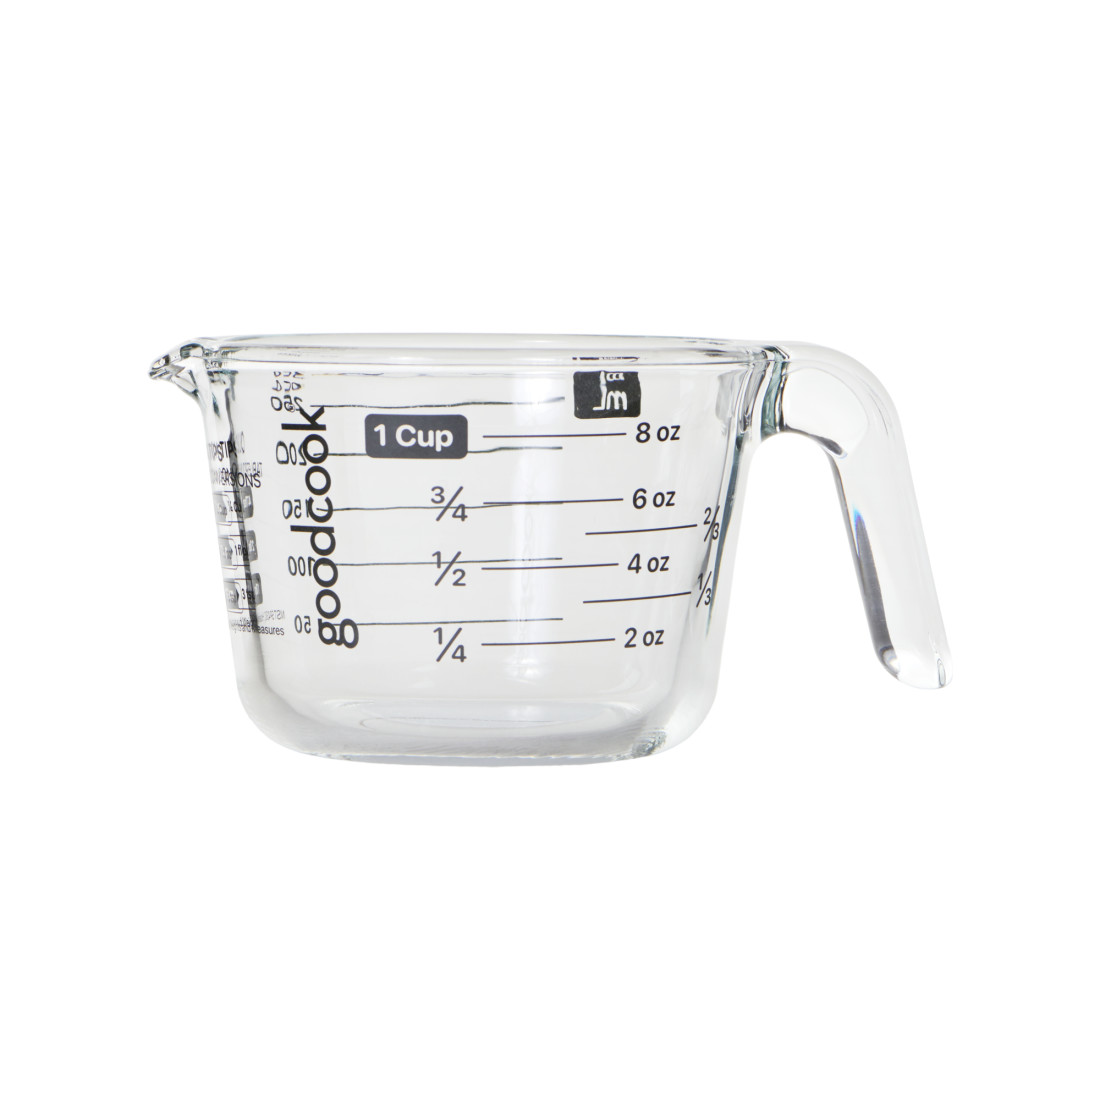 Good Cook 4-Ounce Measuring Glass